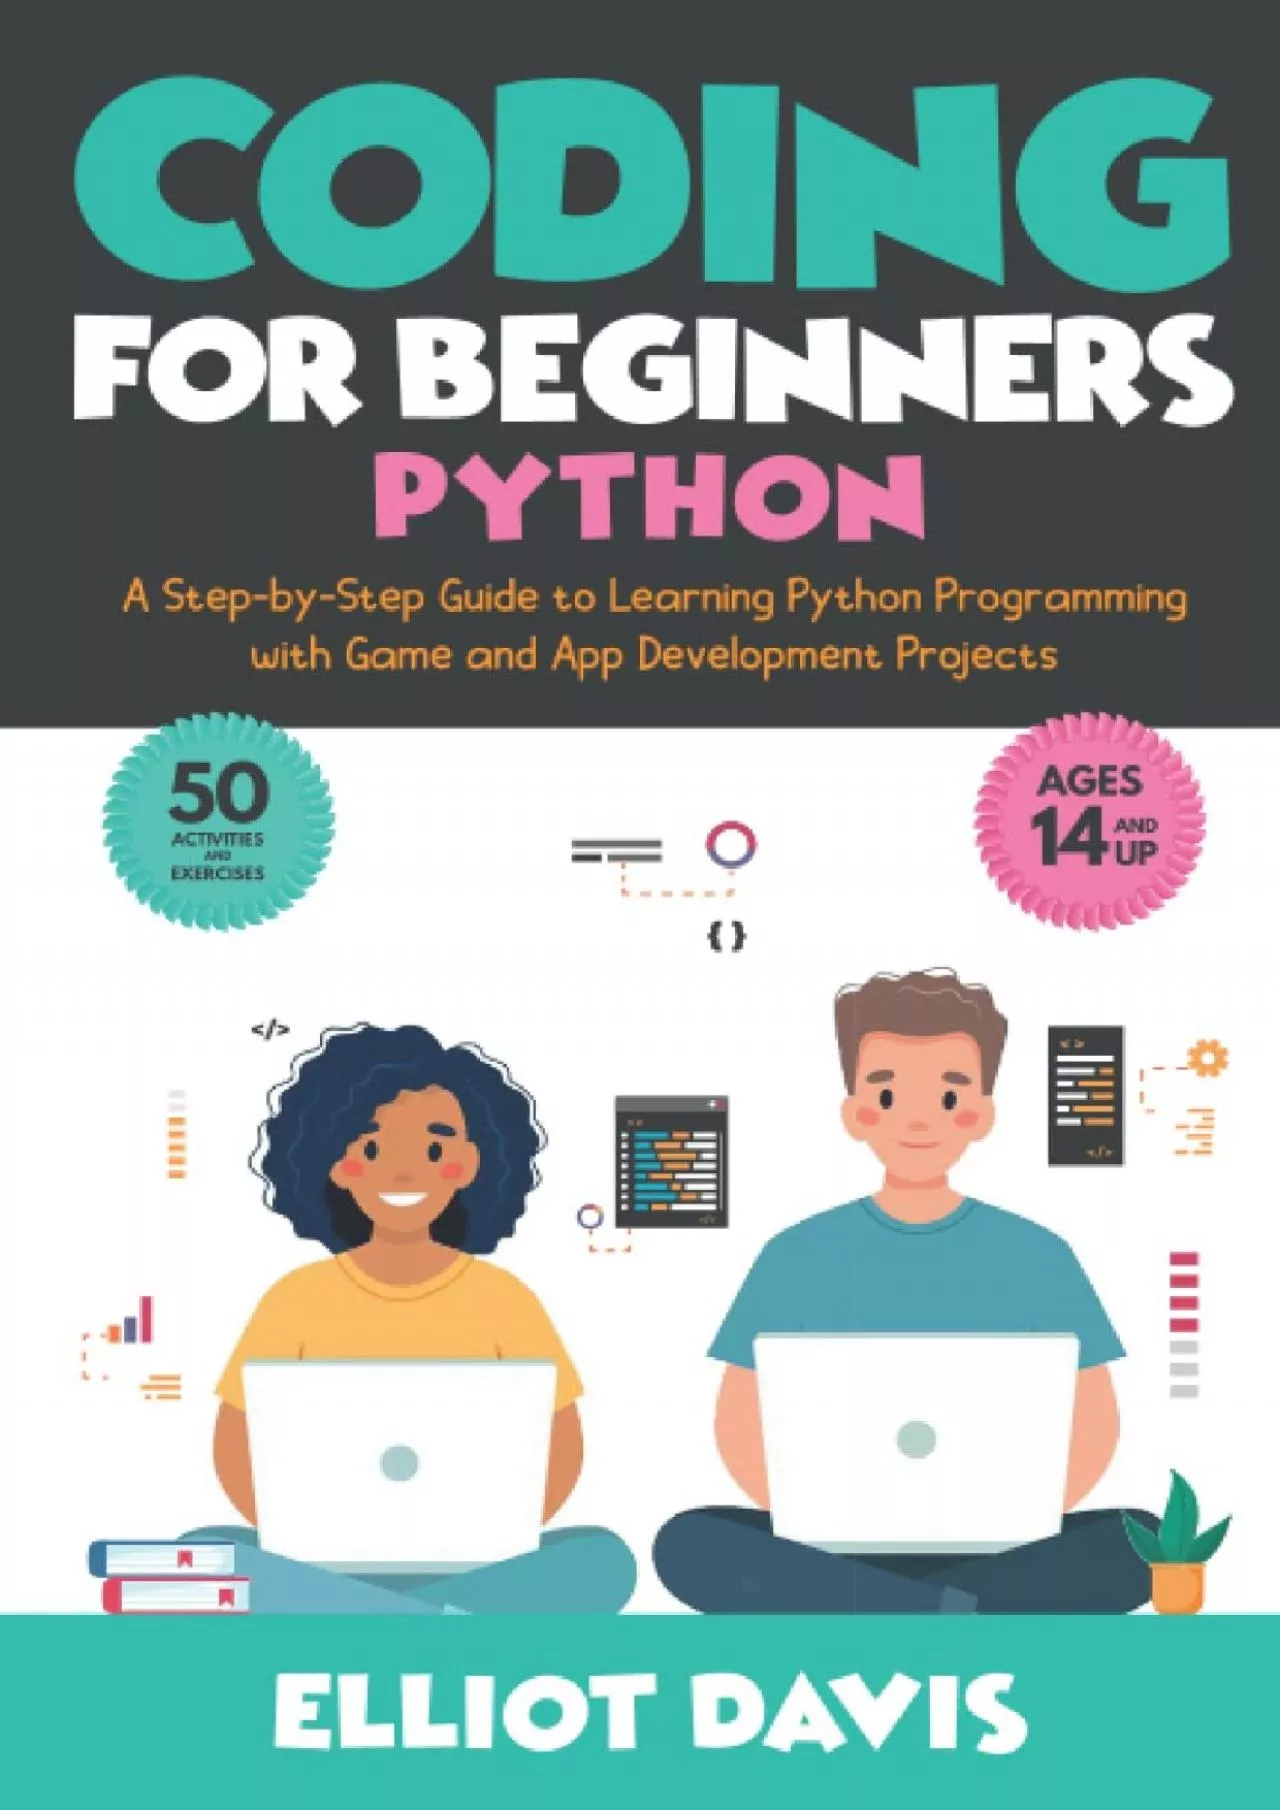 [READING BOOK]-Coding for Beginners: Python: A Step-by-Step Guide to Learning Python Programing